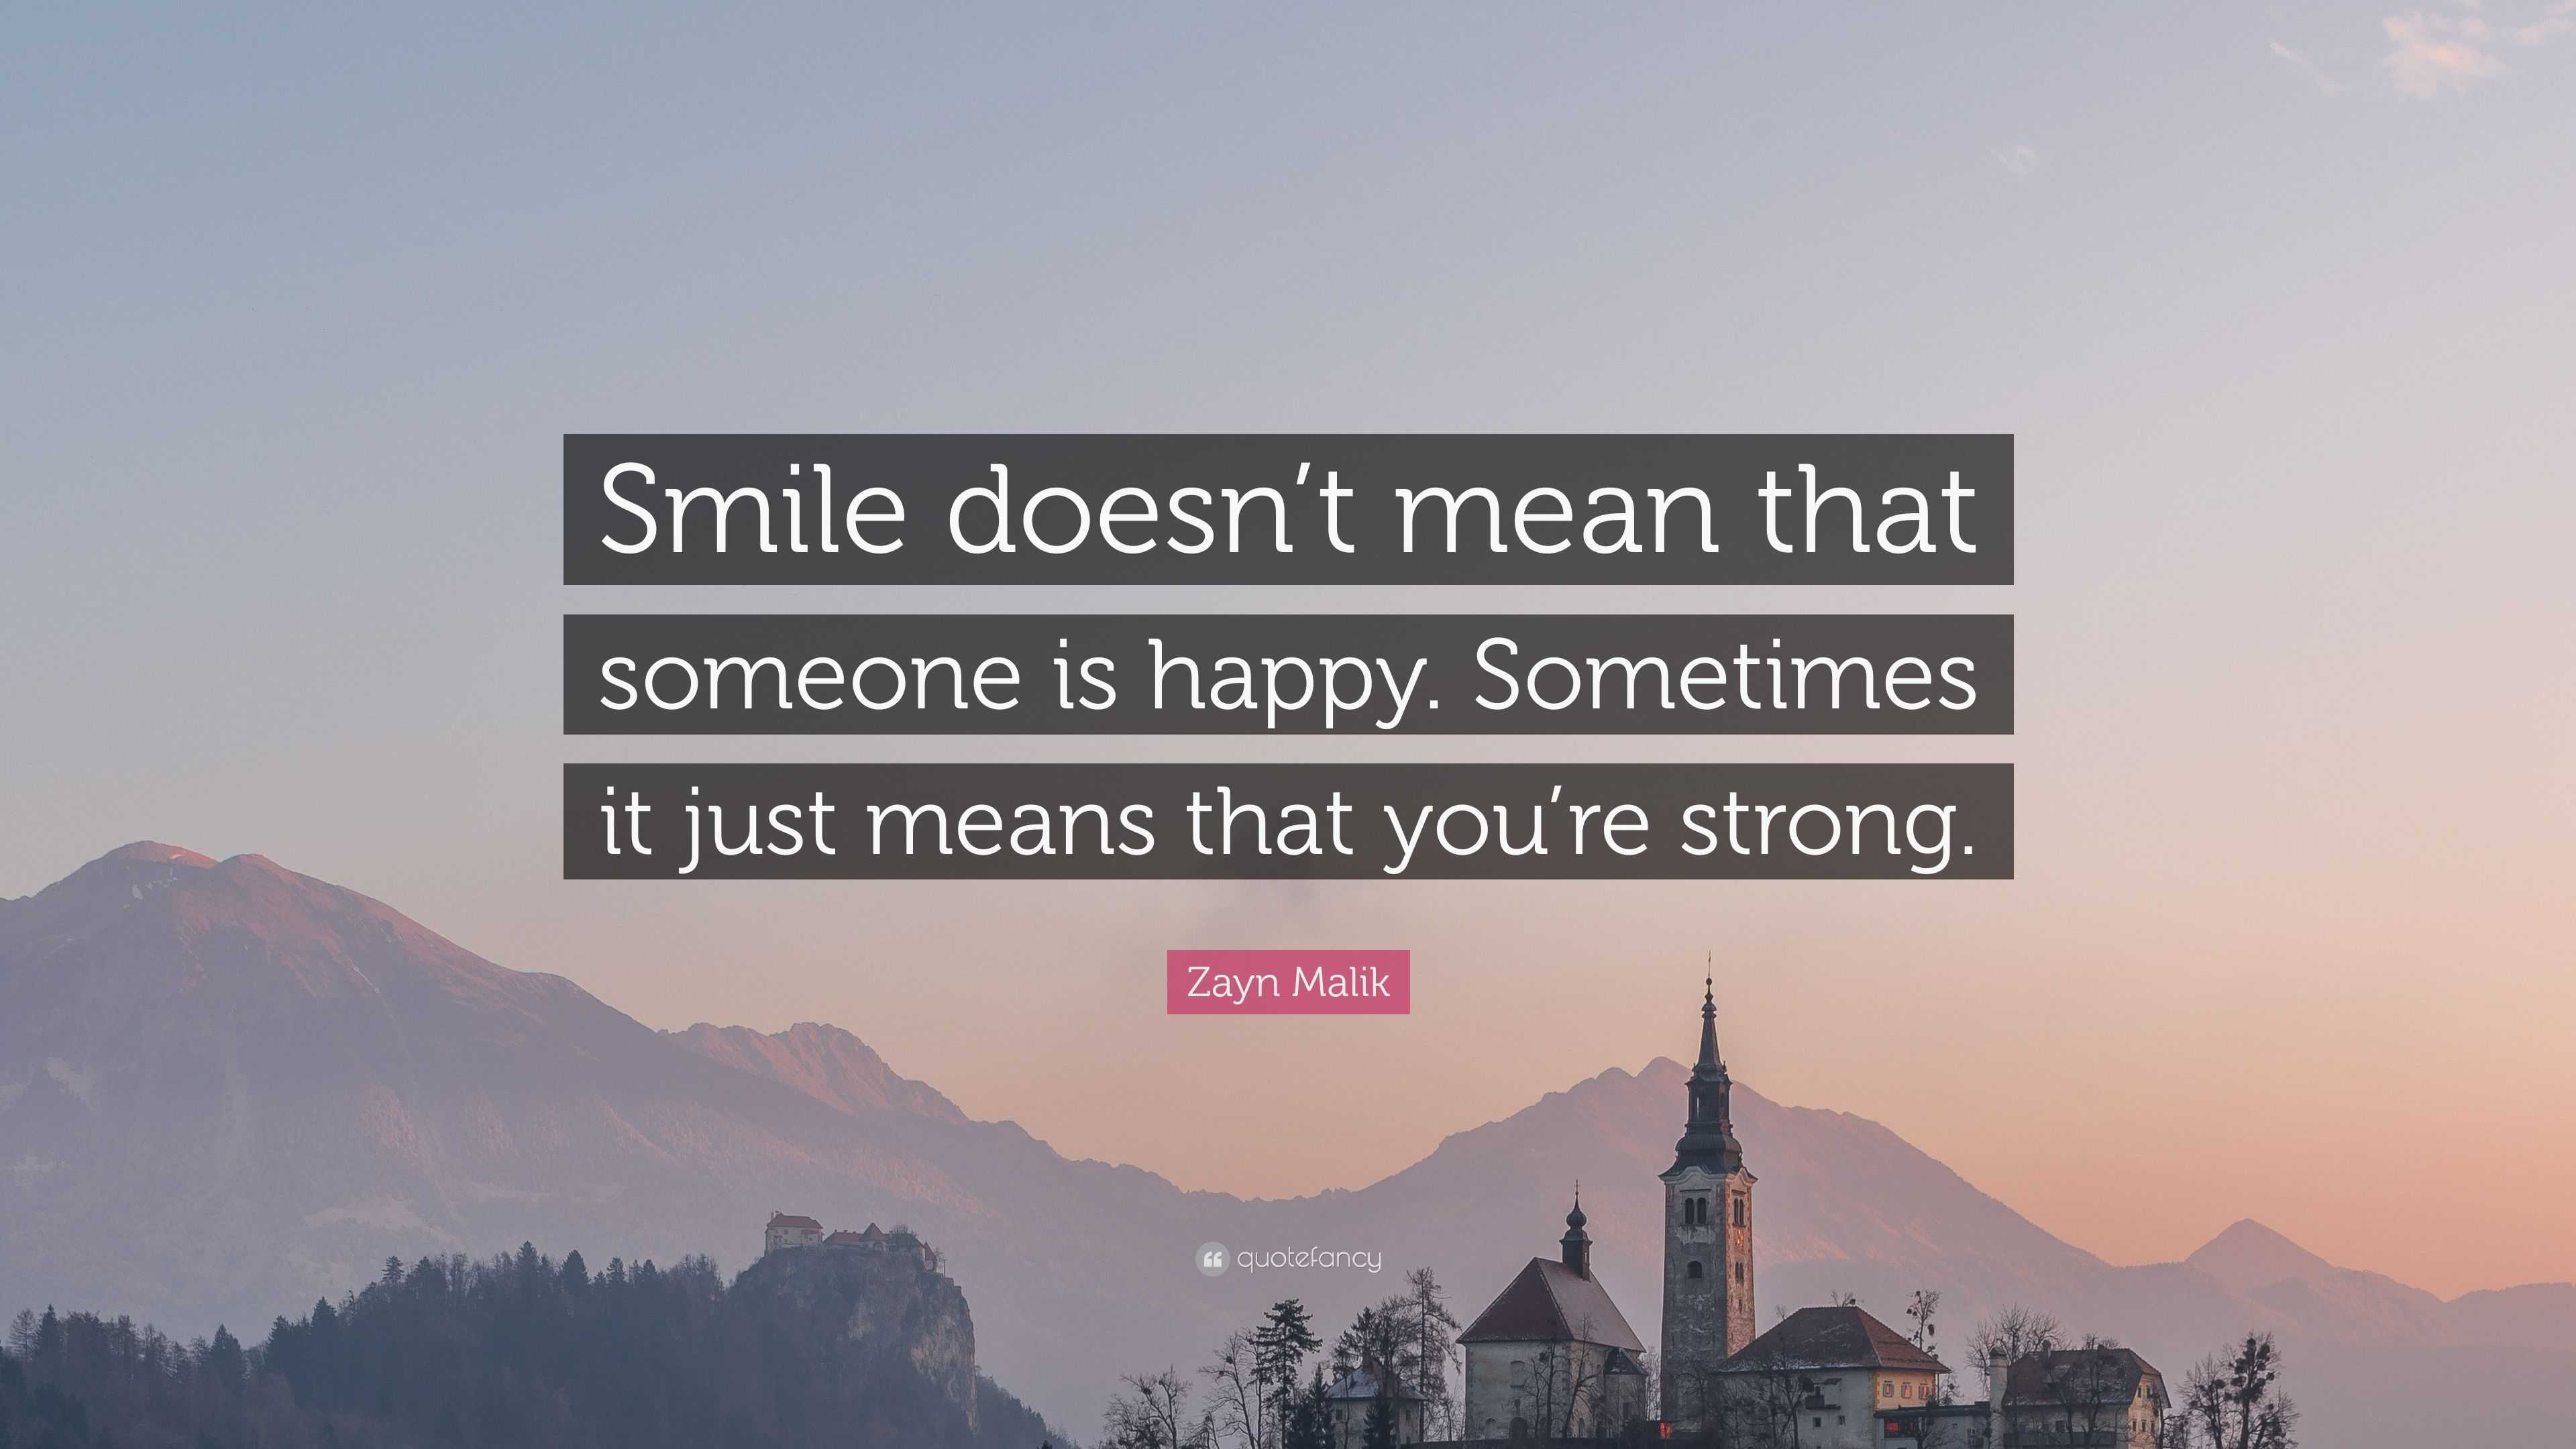 Zayn Malik Quote: “Smile doesn’t mean that someone is happy. Sometimes ...